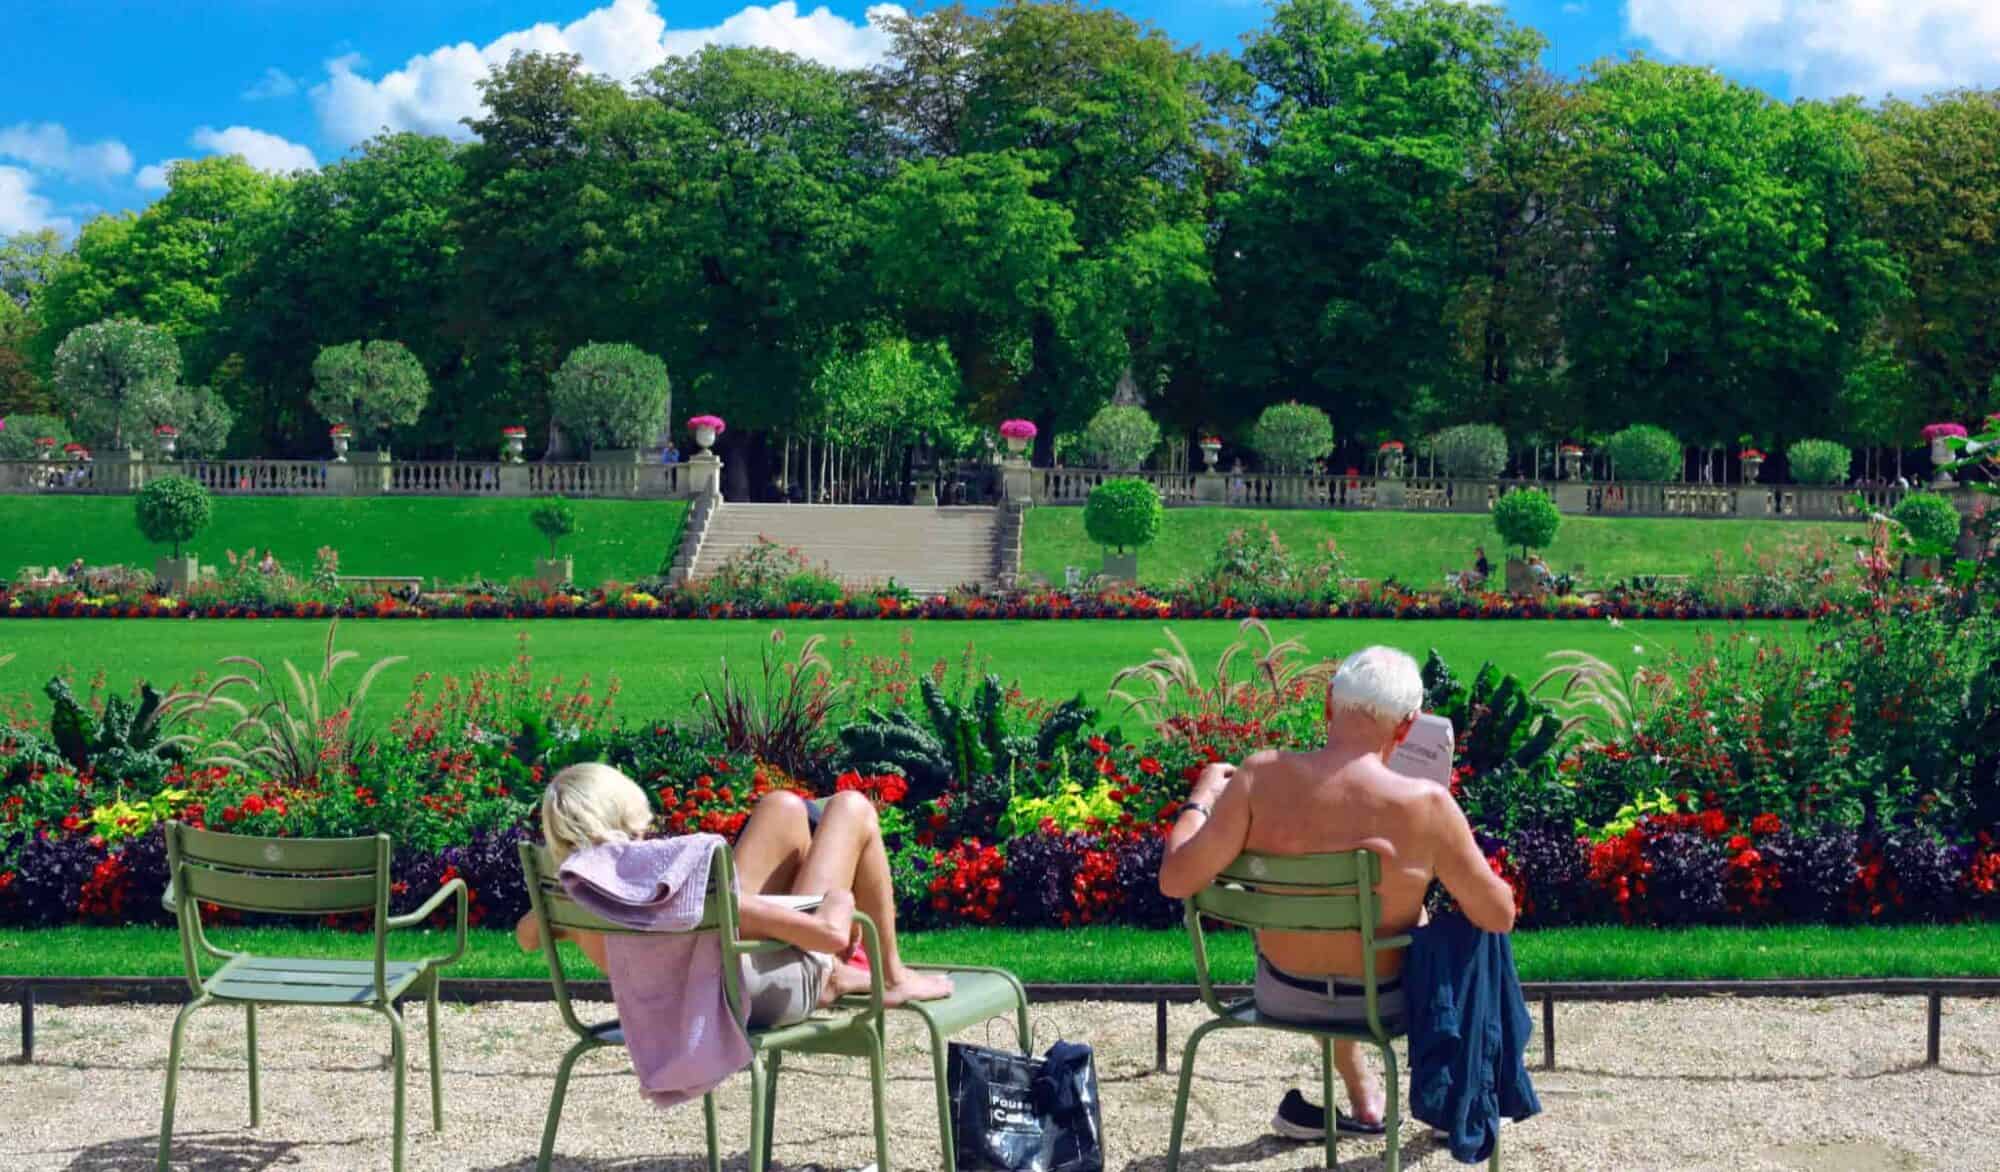 An elderly man and woman sitting on green chairs in Jardin du Luxembourg in Paris.